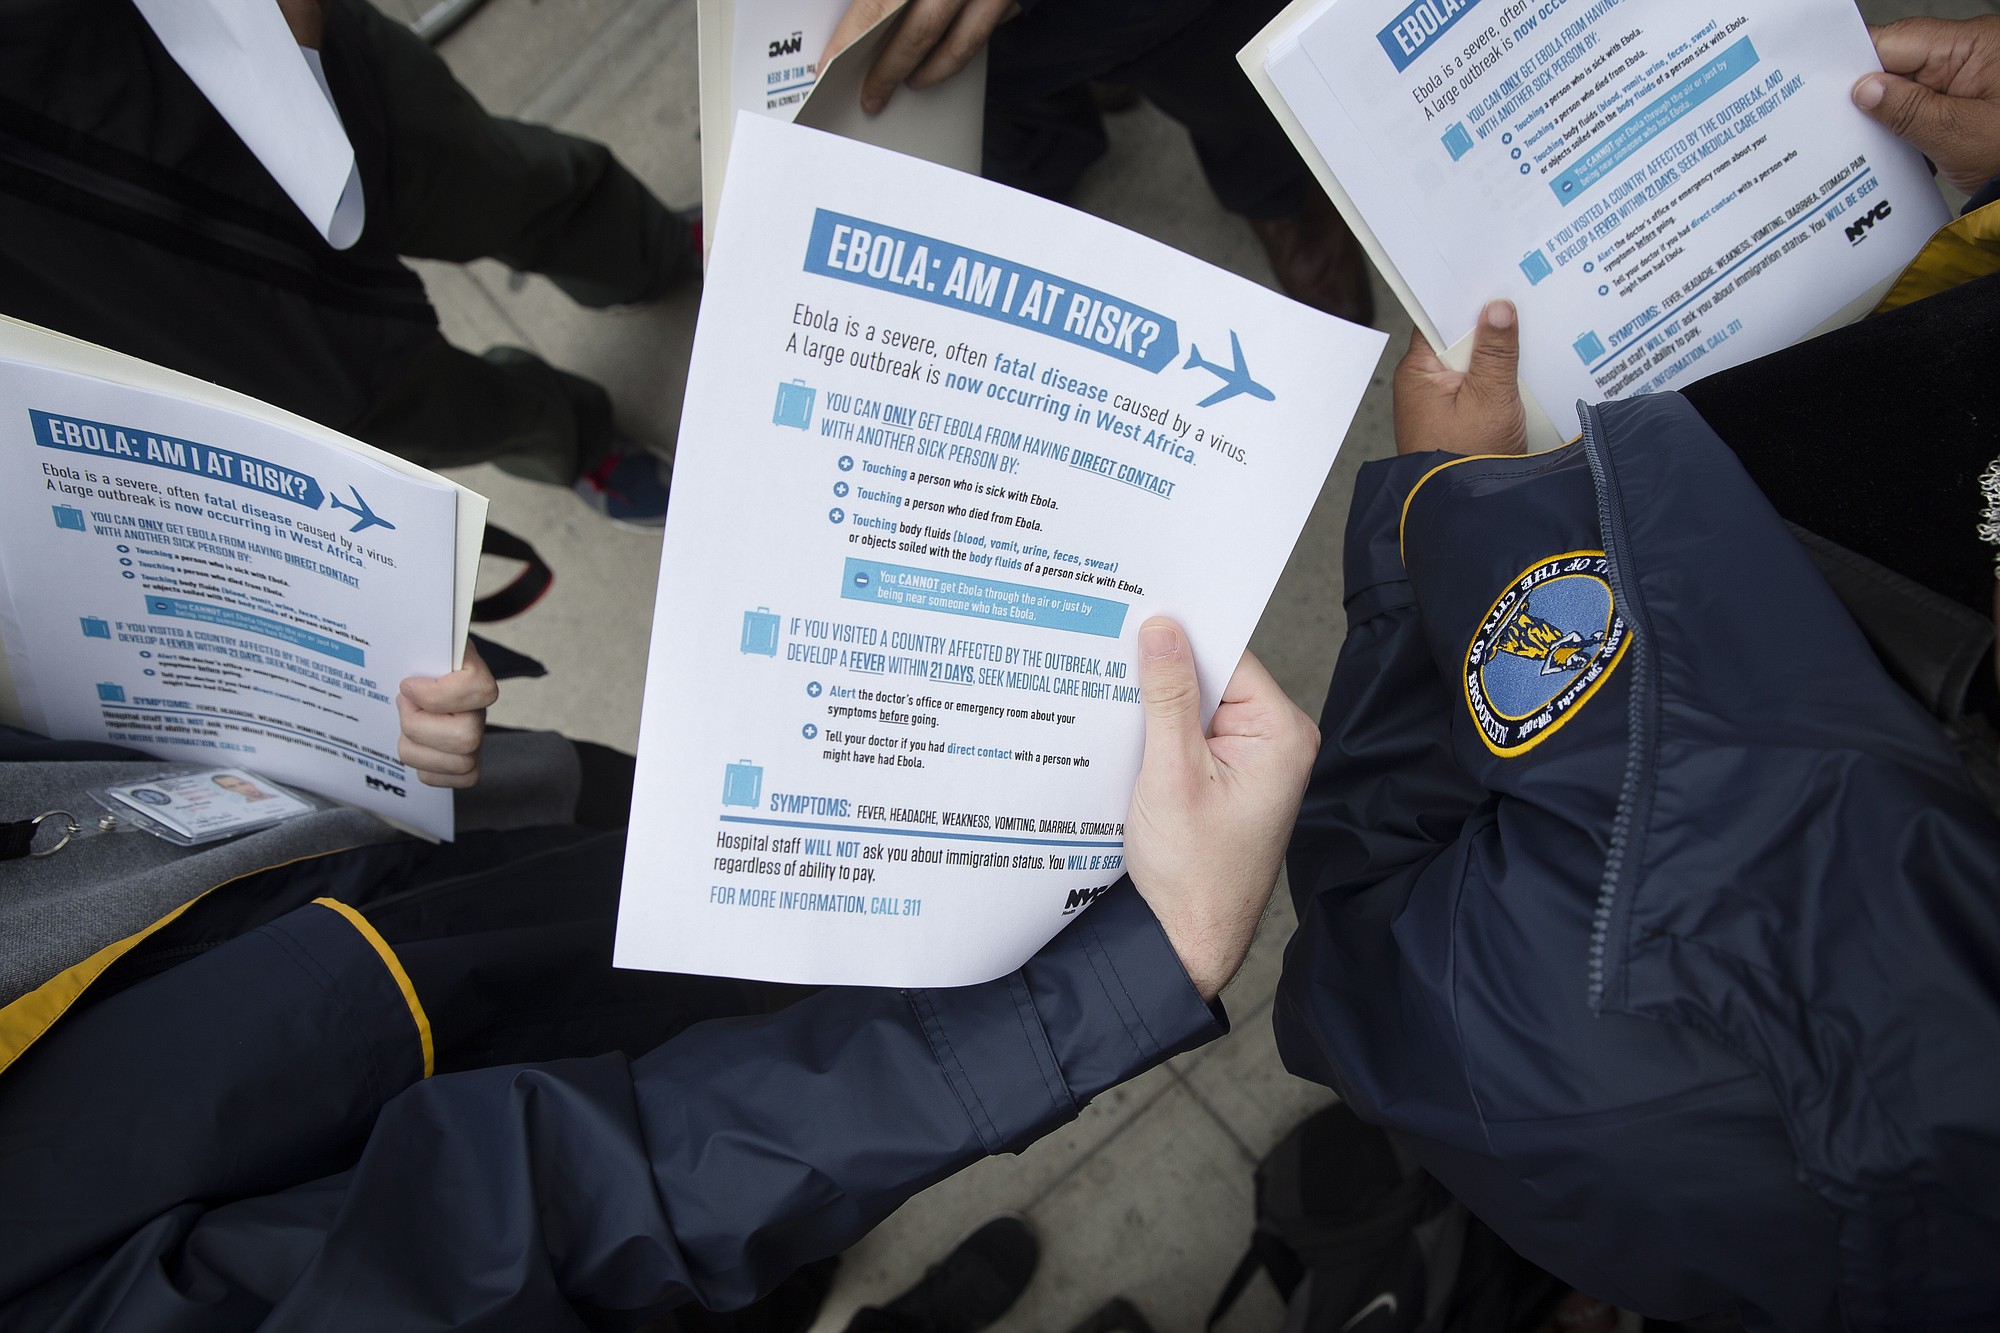 Members of the Brooklyn Borough President's office hand out fliers detailing the risks of Ebola outside The Gutter bowling alley in the Williamsburg neighborhood of the Brooklyn borough of New York.